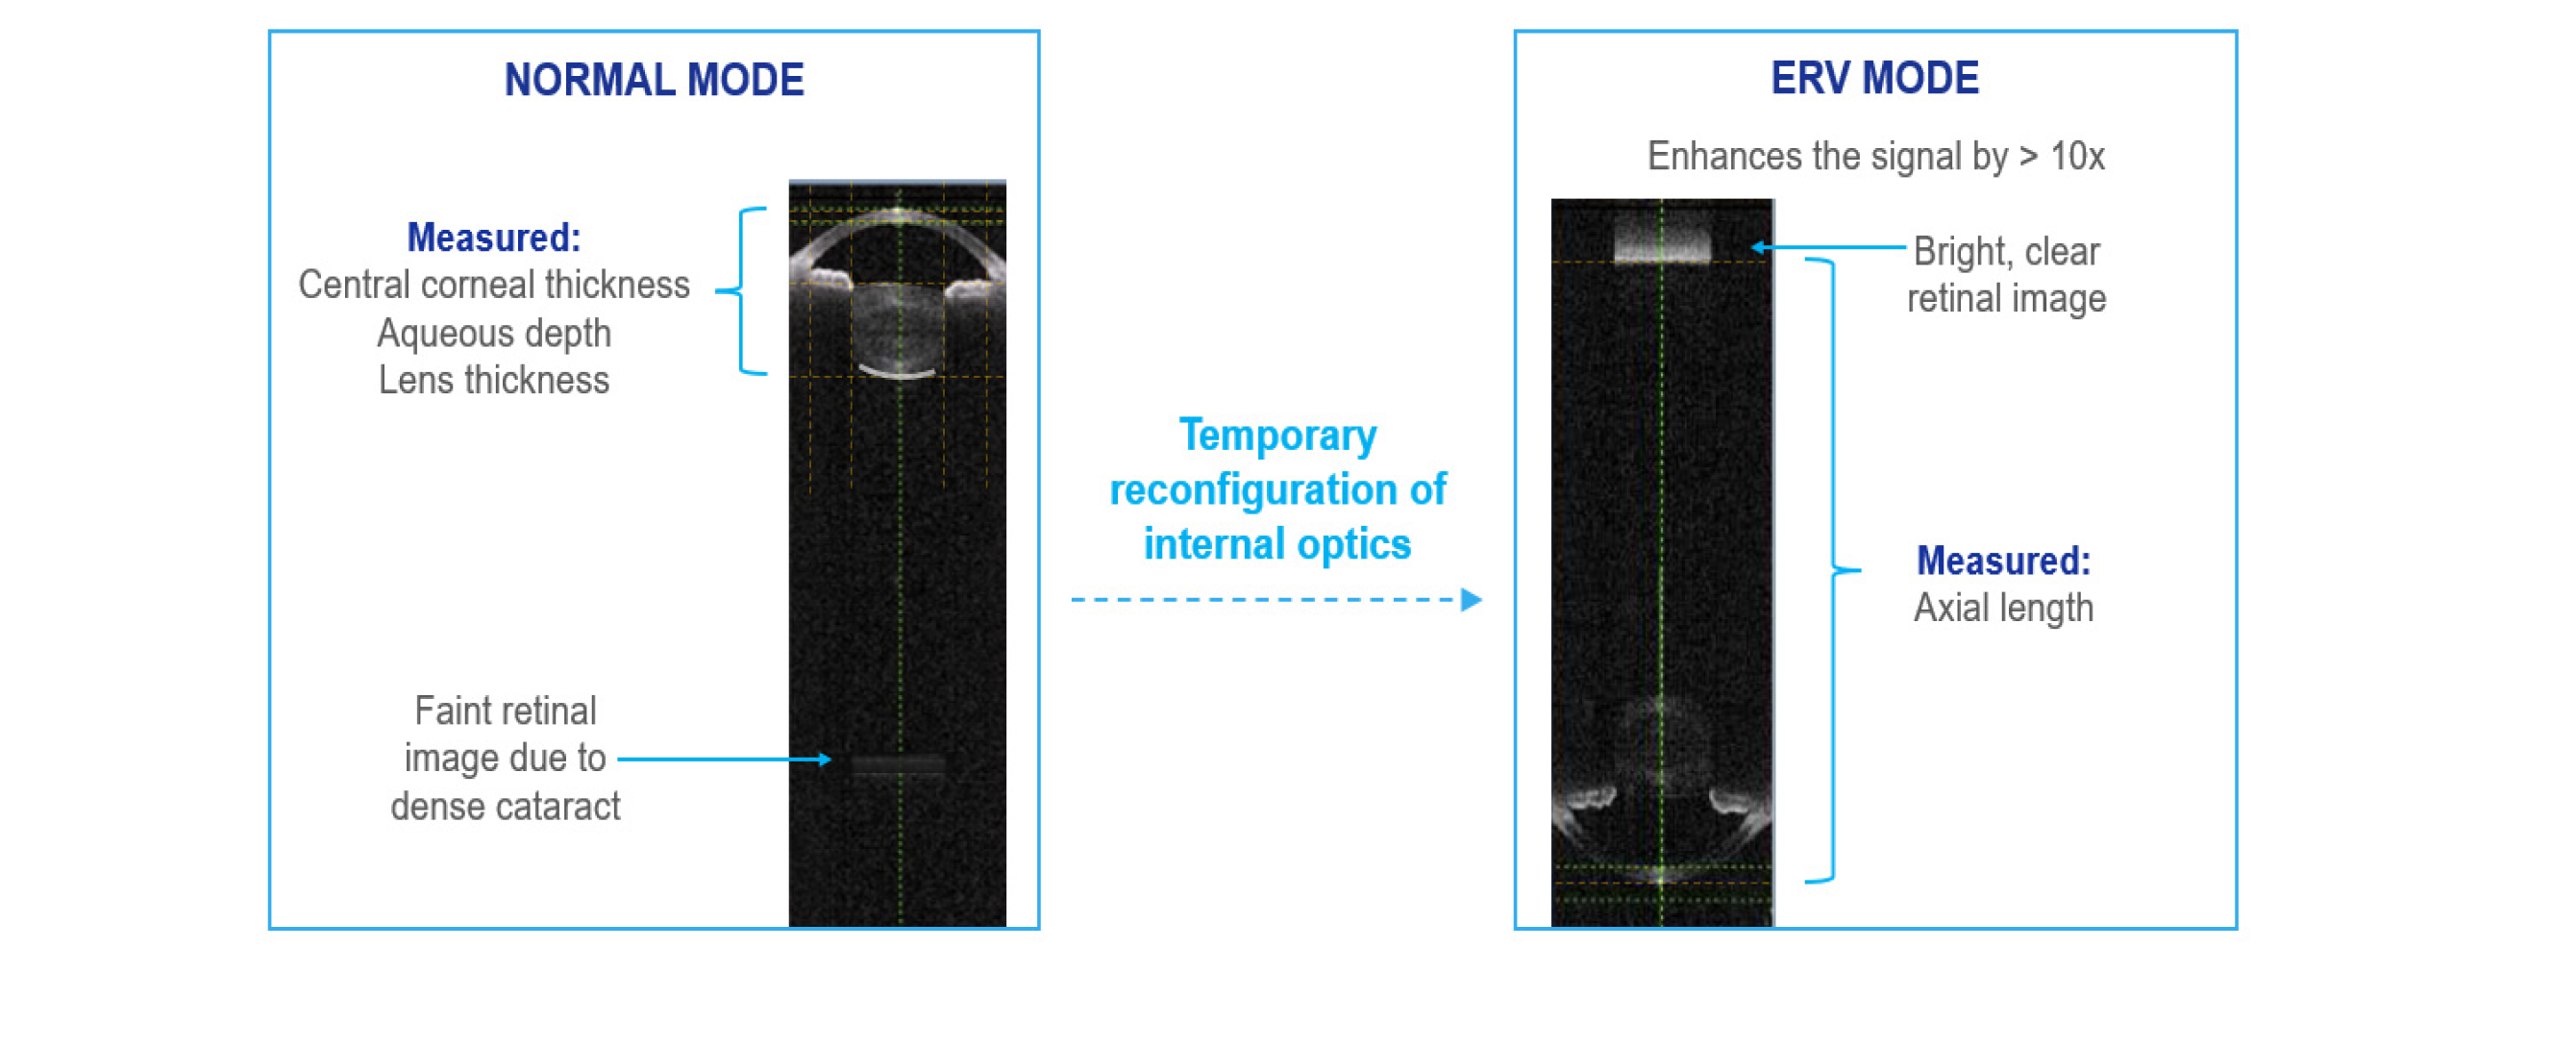 A comparison of biometry images captured by the ARGOS Biometer in normal mode and in enhanced retina visualization (ERV) mode. ERV mode reconfigures the internal optics to enhance the signal at the retina by 10 times compared to normal mode.